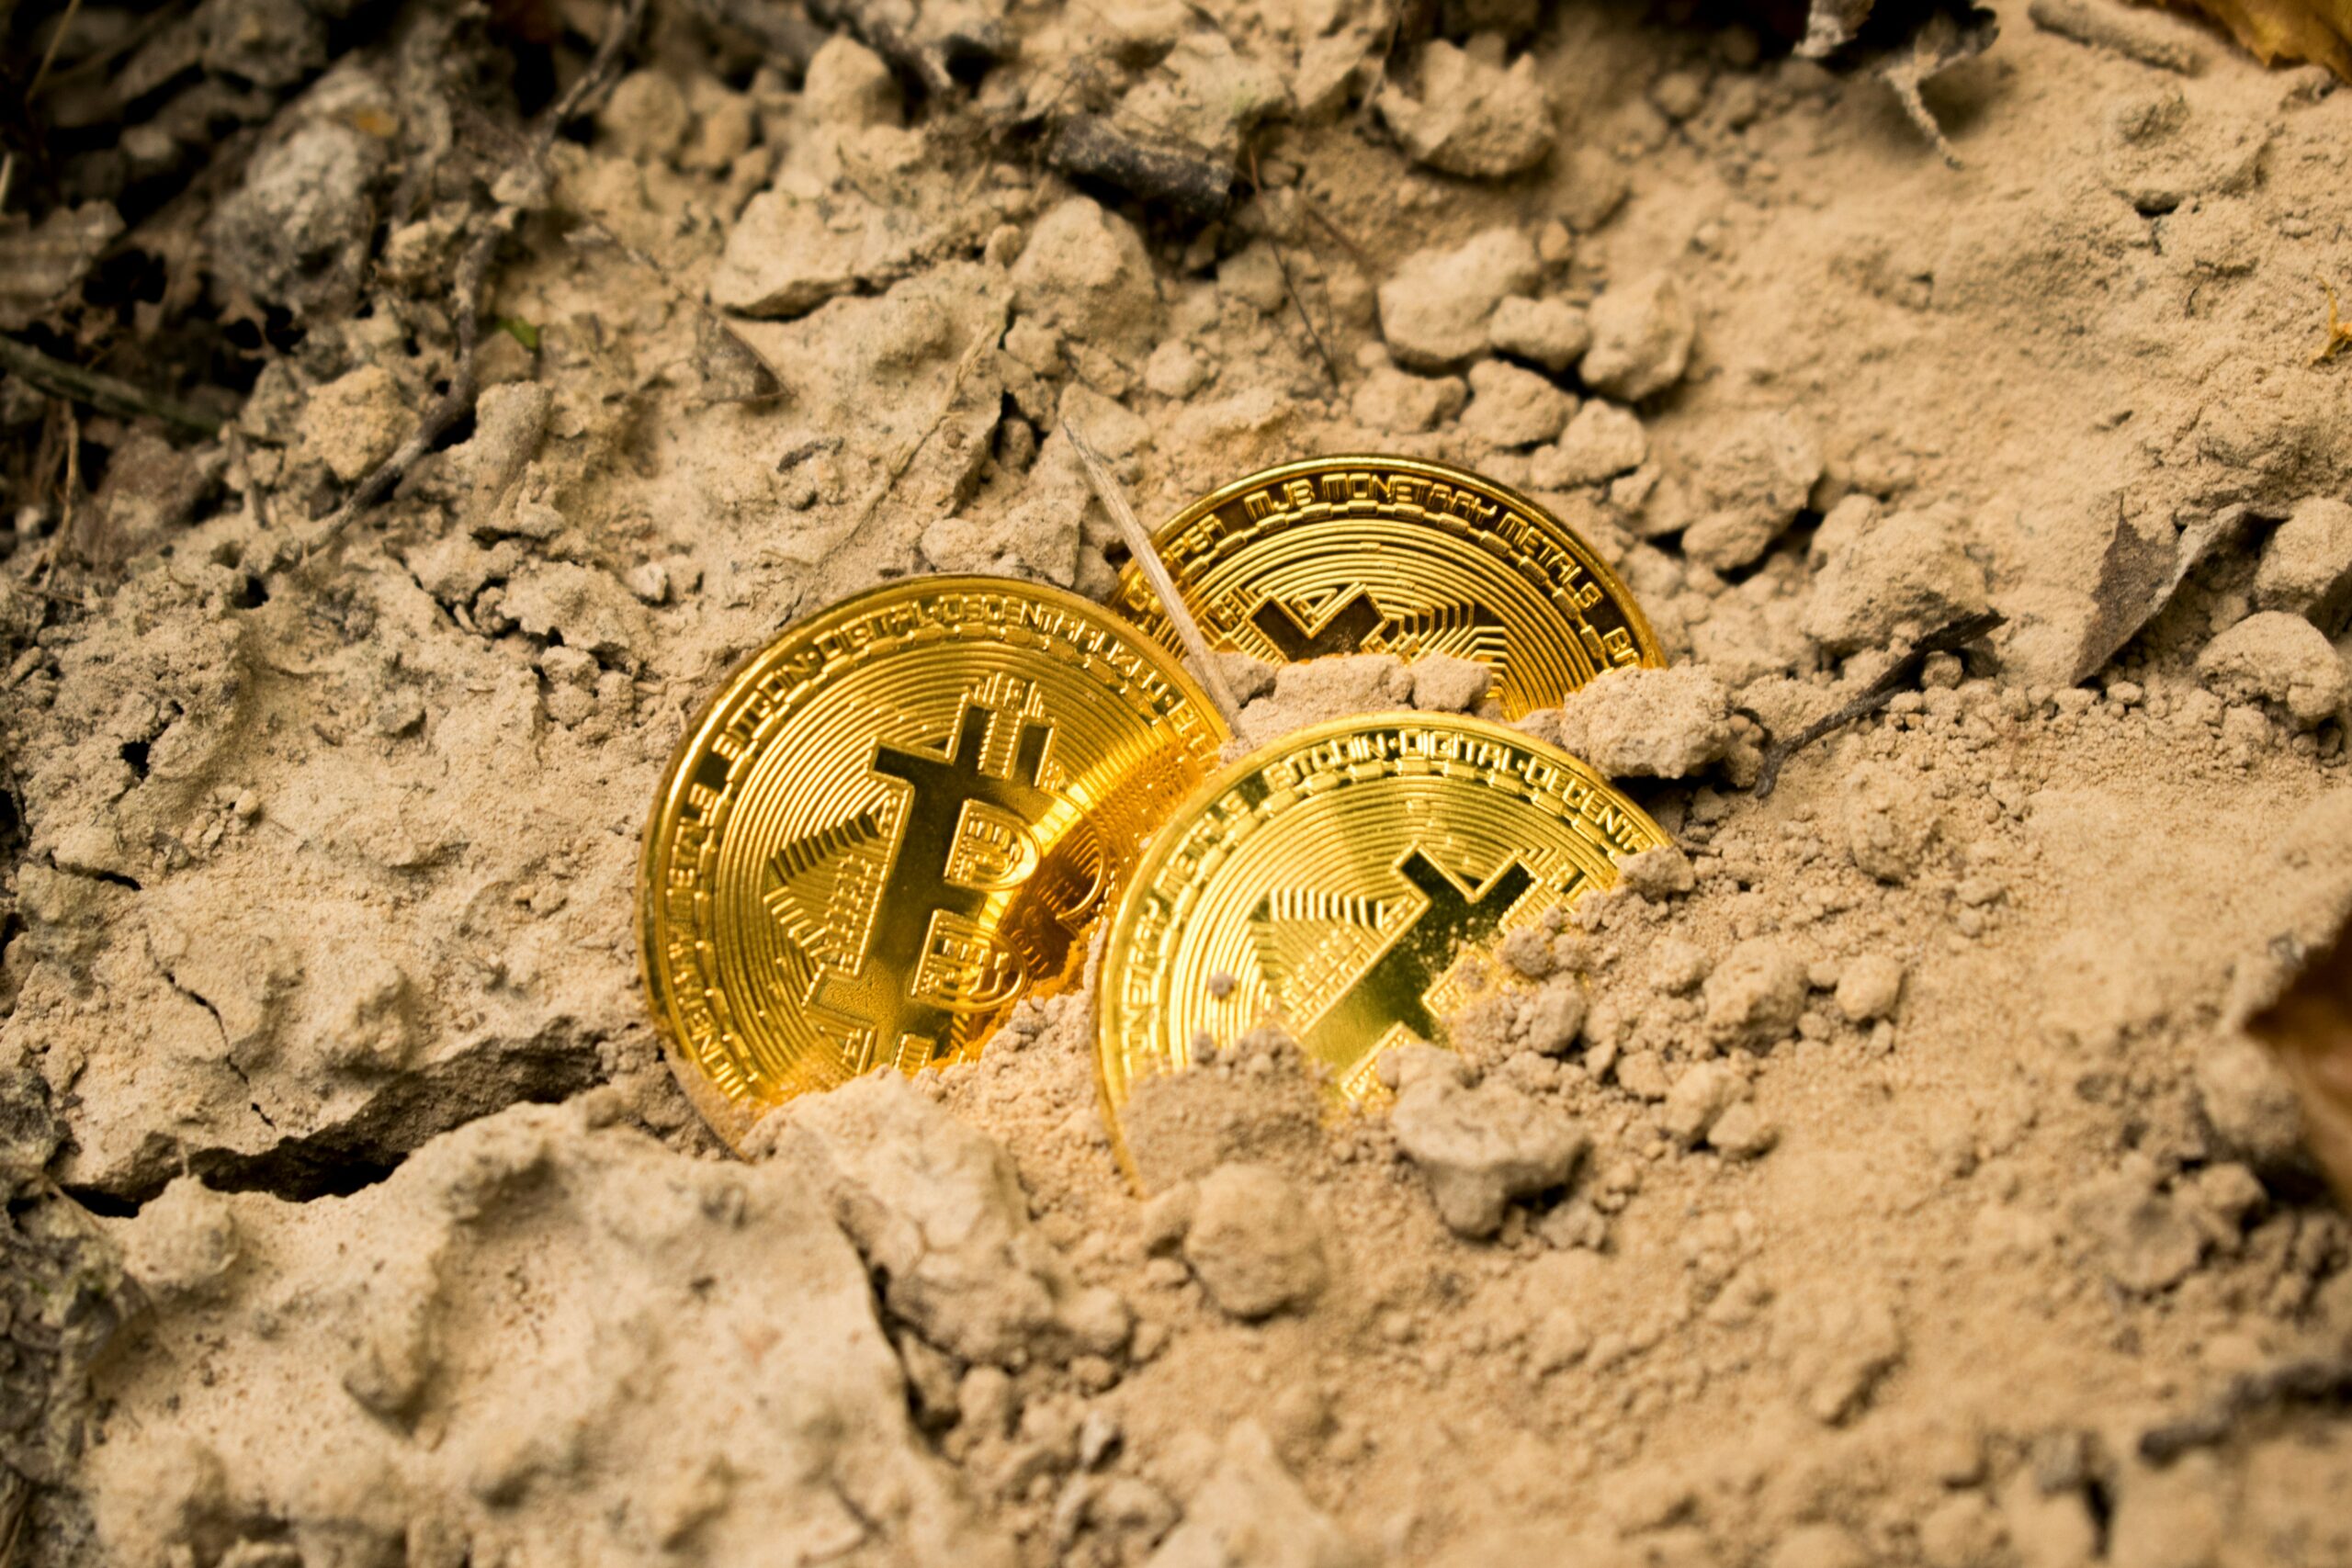 It was the second-highest earning day in bitcoin mining history on March 6, when the amount of money made by bitcoin miners skyrocketed to an astounding $75.9 million.